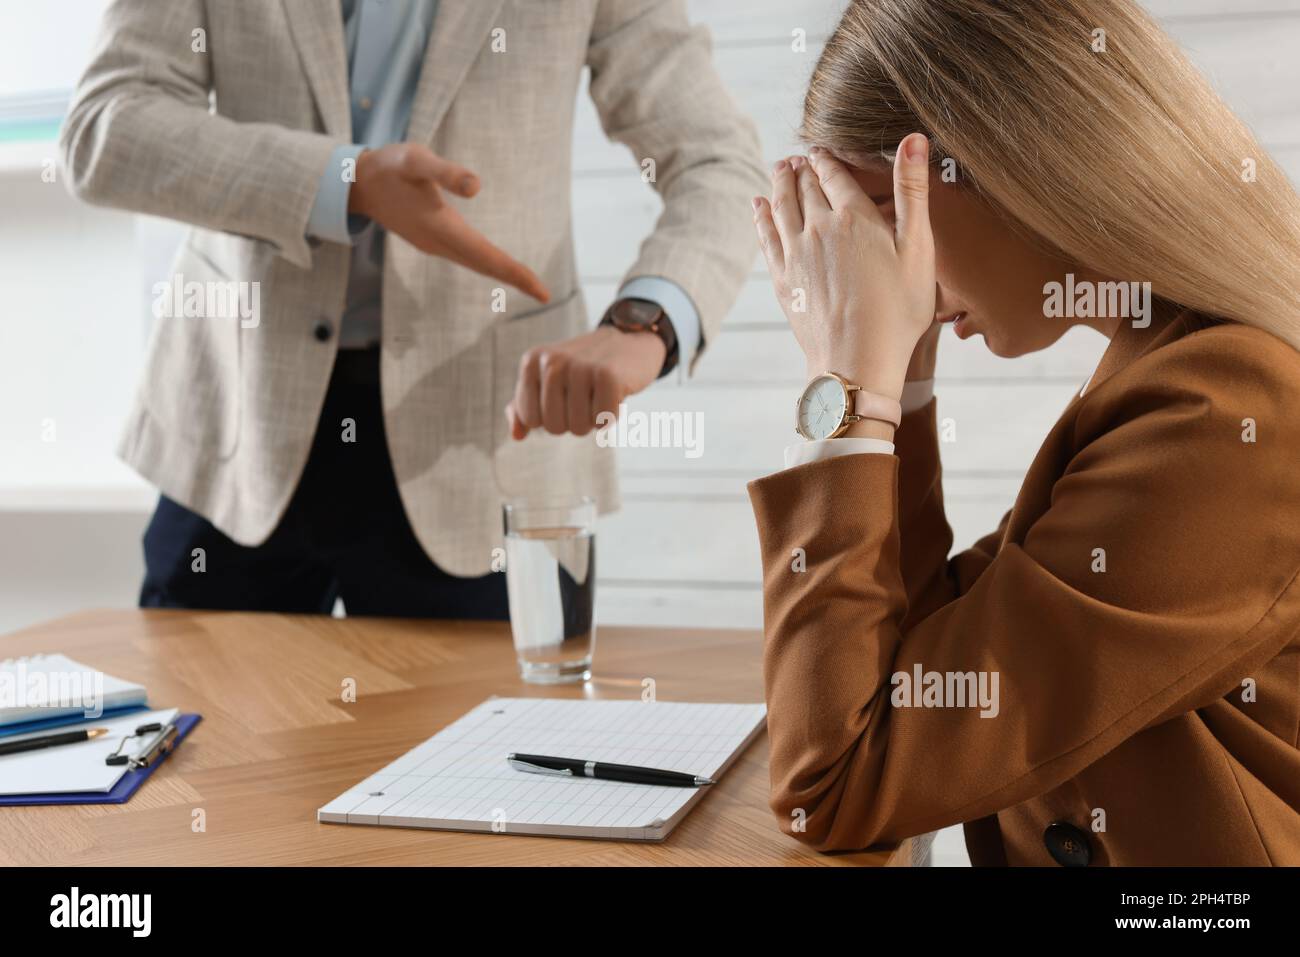 Businessman pointing on wrist watch while scolding employee for being late in office Stock Photo